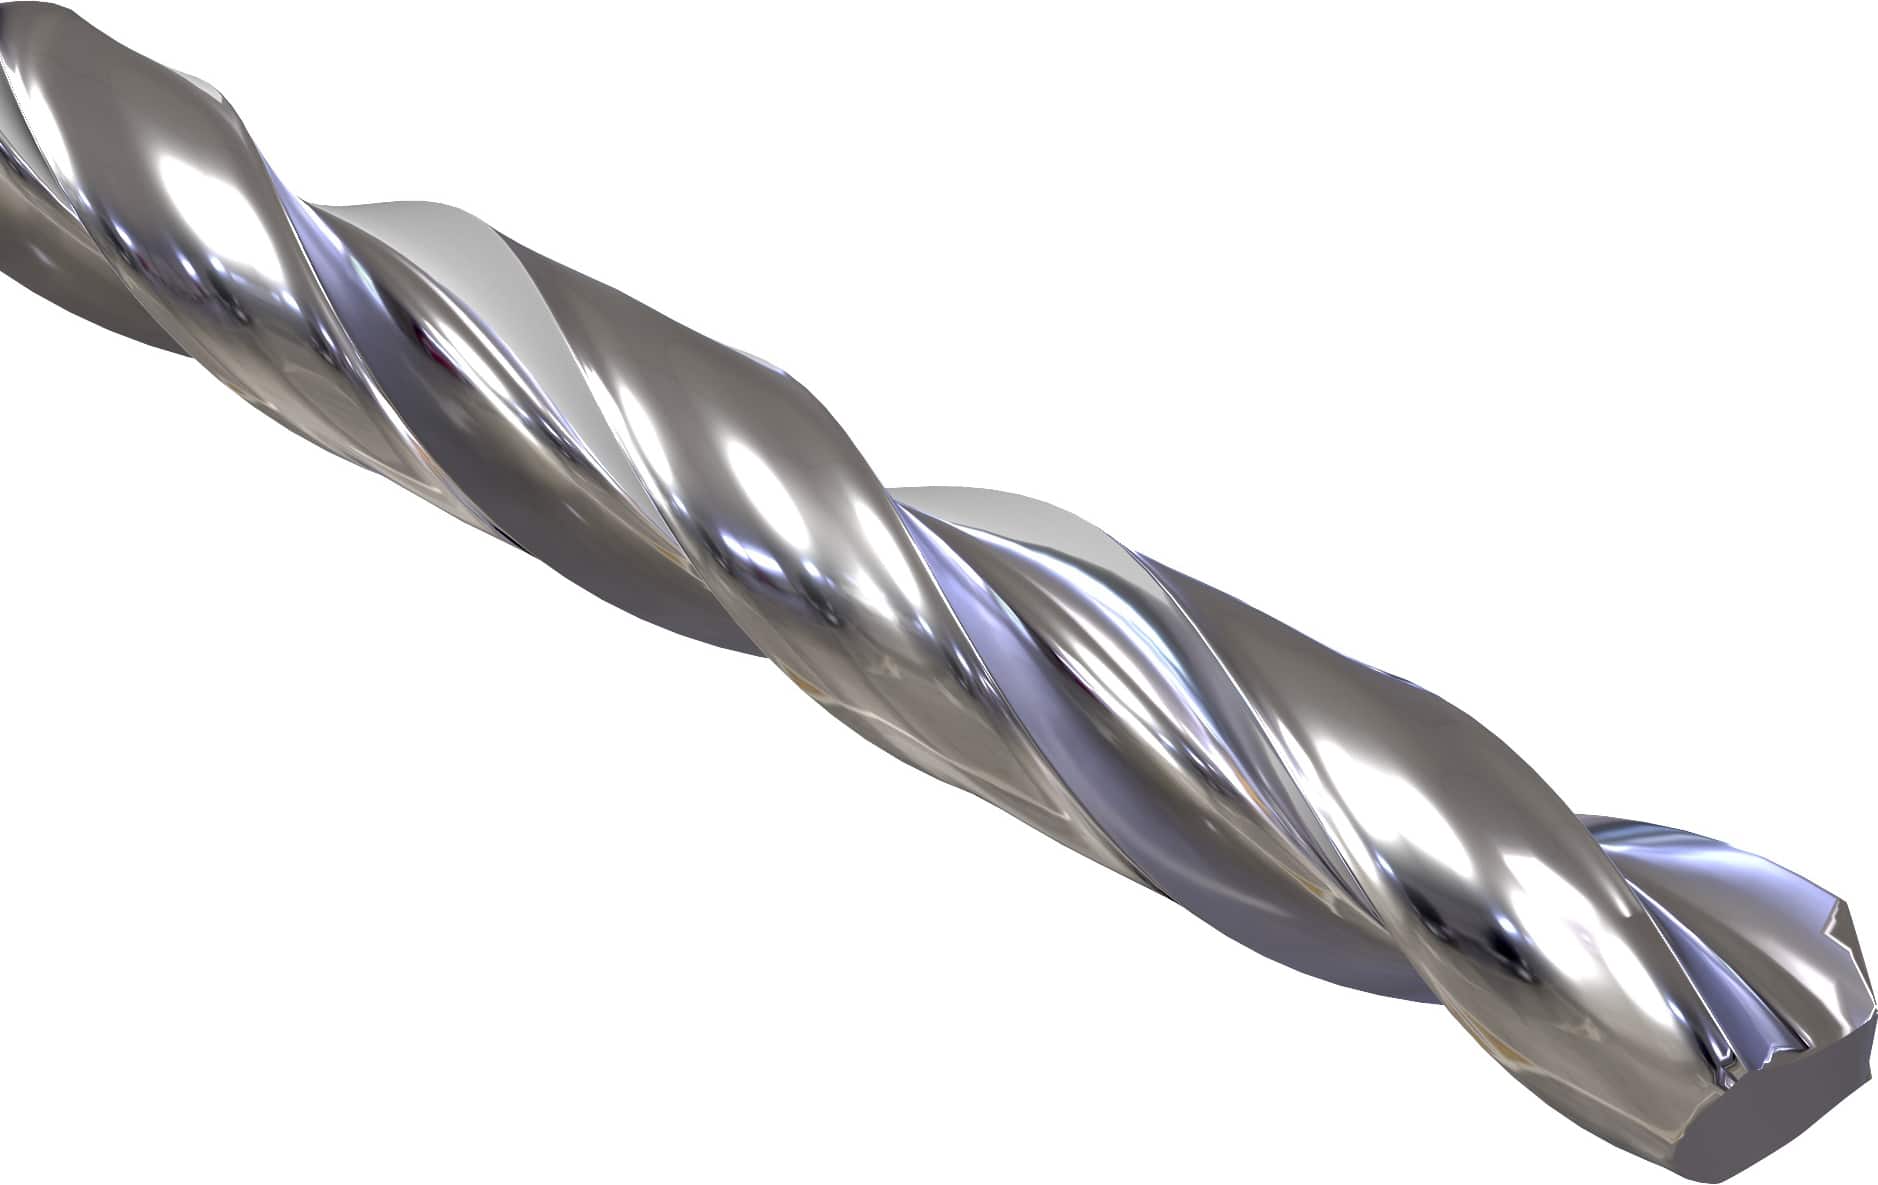 CLE-LINE Jobber Length Drill Bit: #29 Drill Bit Size, 1-3/4 in Flute Lg,  2-7/8 in Overall Lg